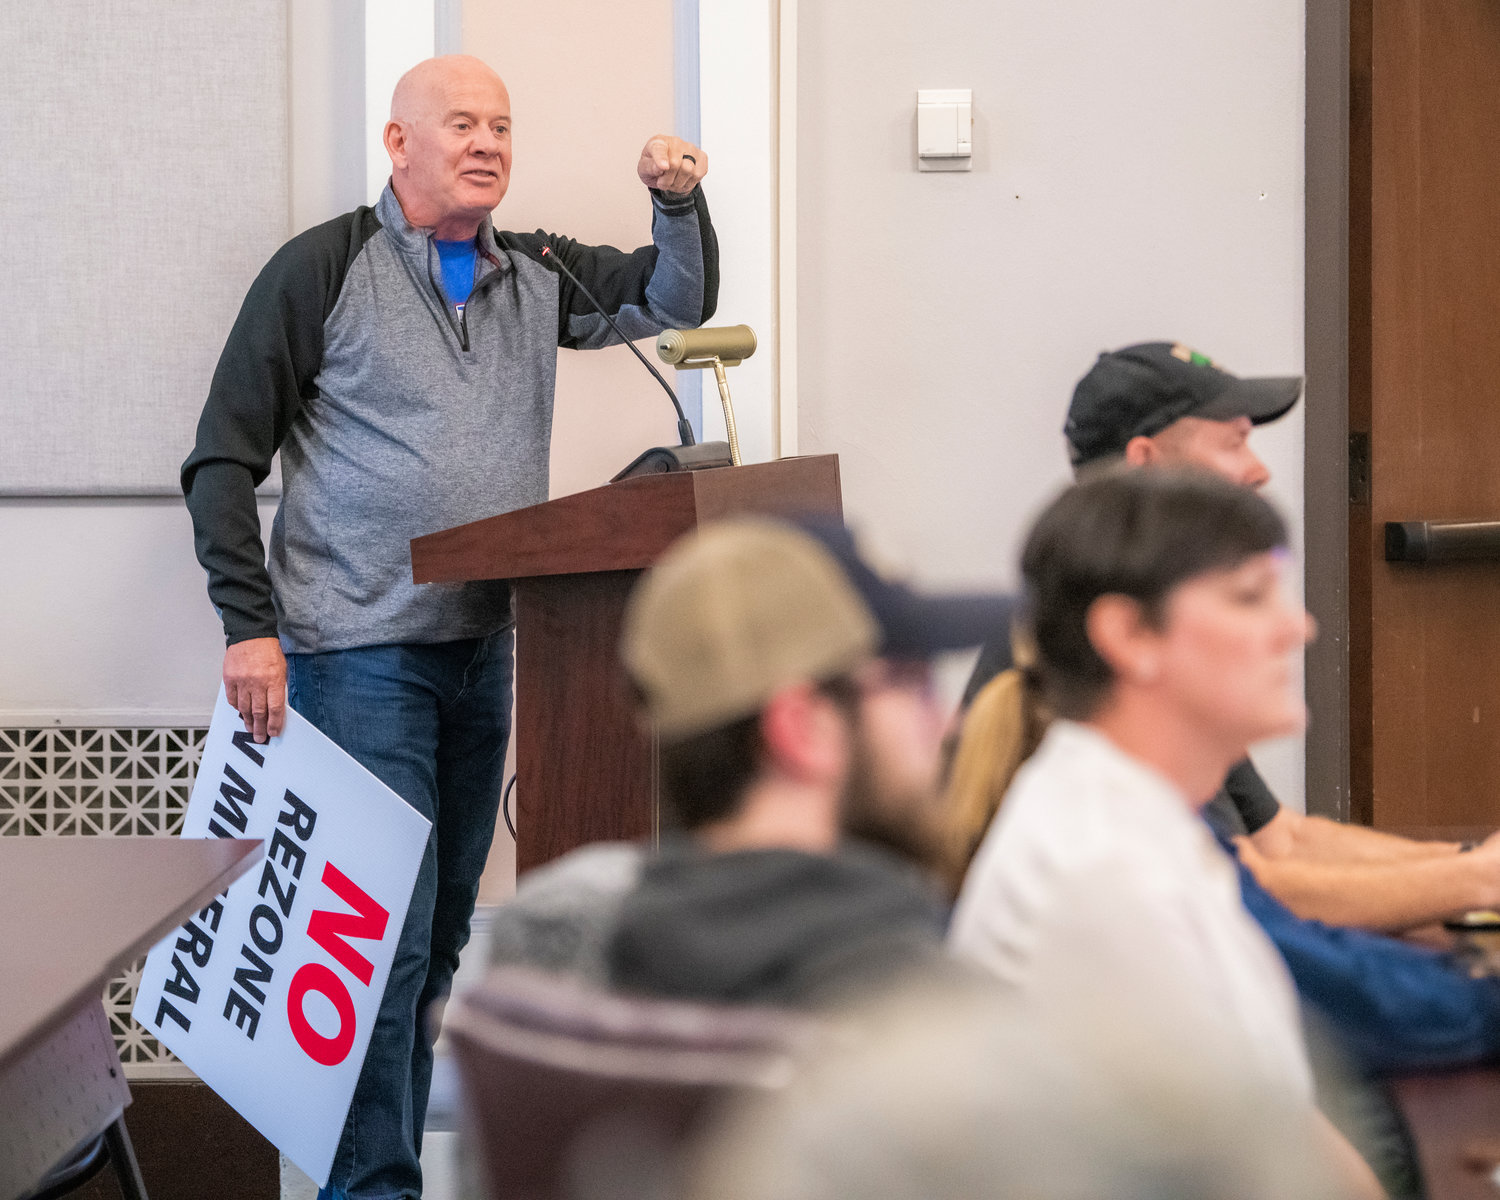 Mike Heinz holds a sign and speaks in opposition of a rezone at Mineral Lake during a public hearing held by the Lewis County Planning Commission in Chehalis on Tuesday.